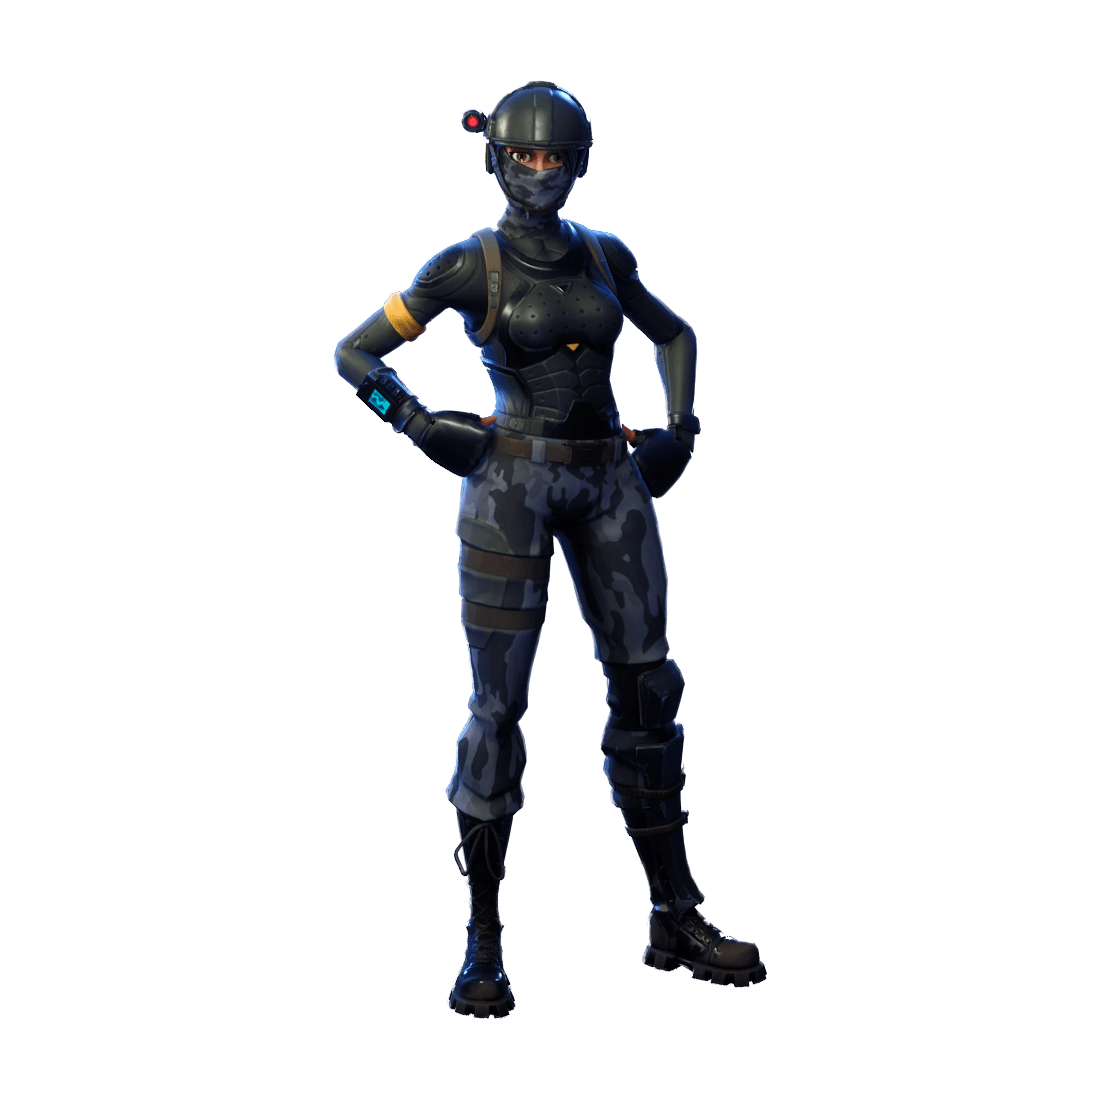 pin by next on games in 2019 epic games new art drawings - fortnite elite agent wallpaper hd